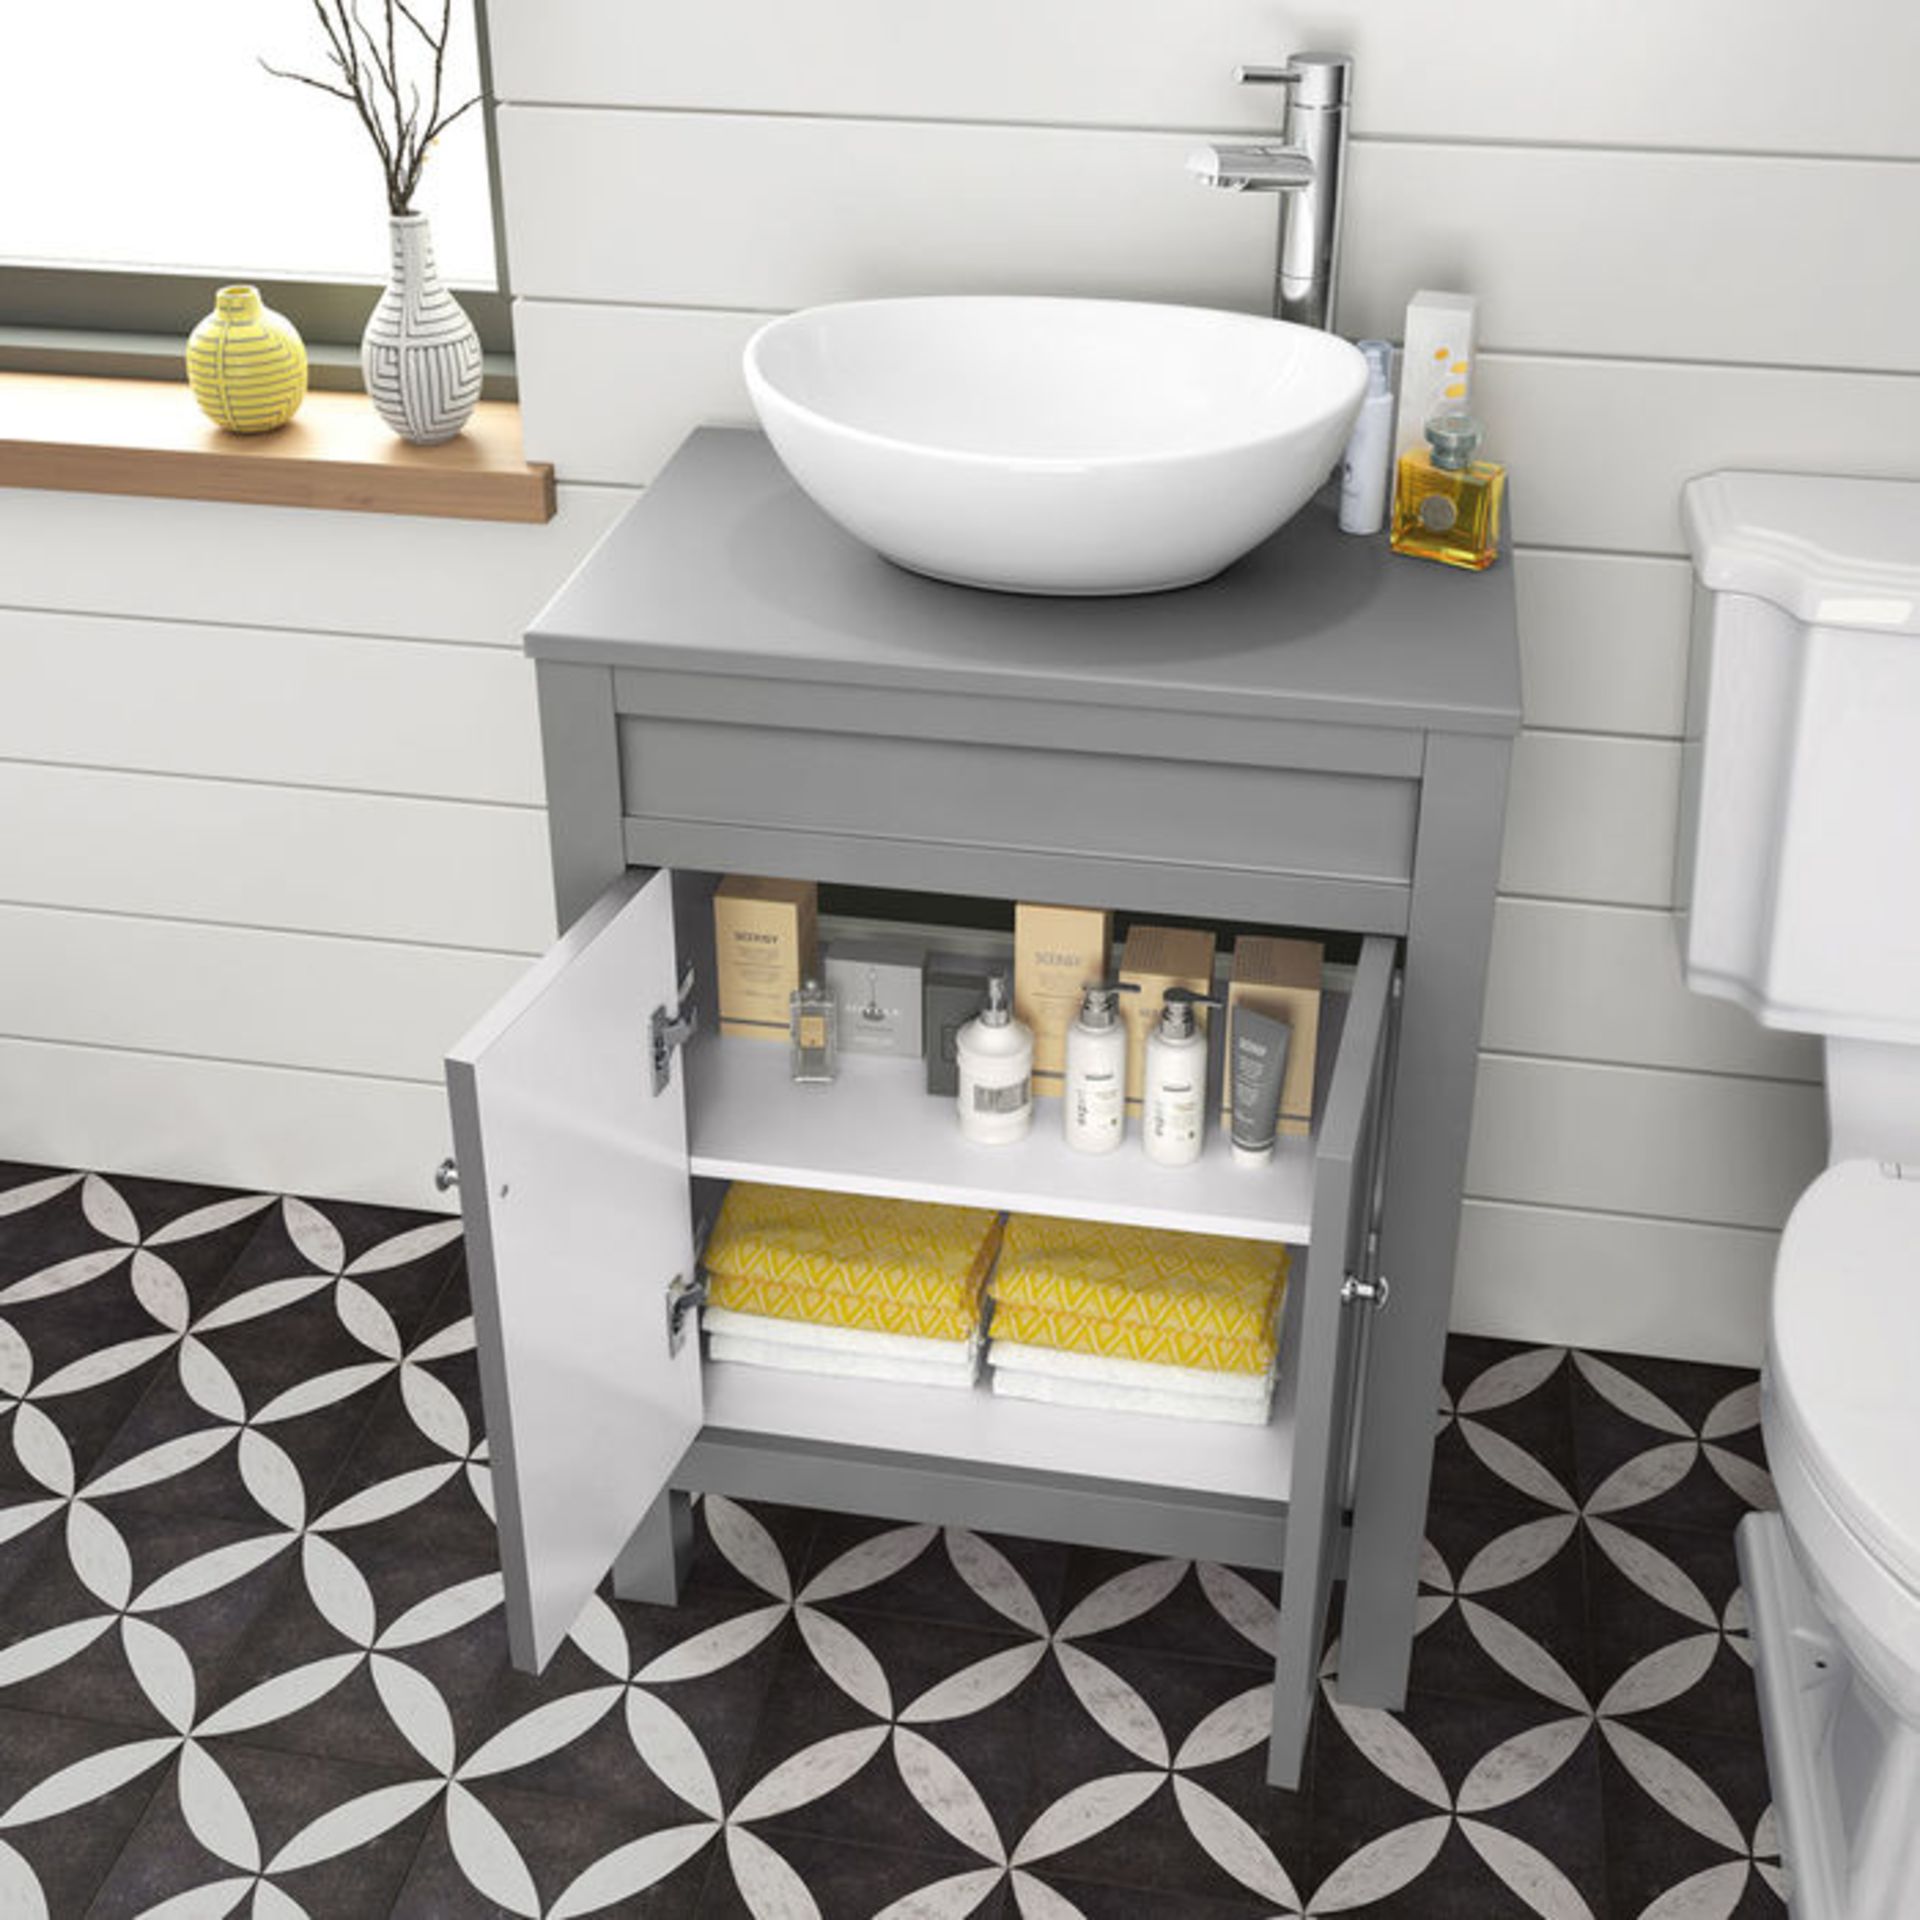 (KL87) 600mm Melbourne Grey Countertop Unit and Camila Basin - Floor Standing. RRP £499.99. Comes - Image 2 of 5